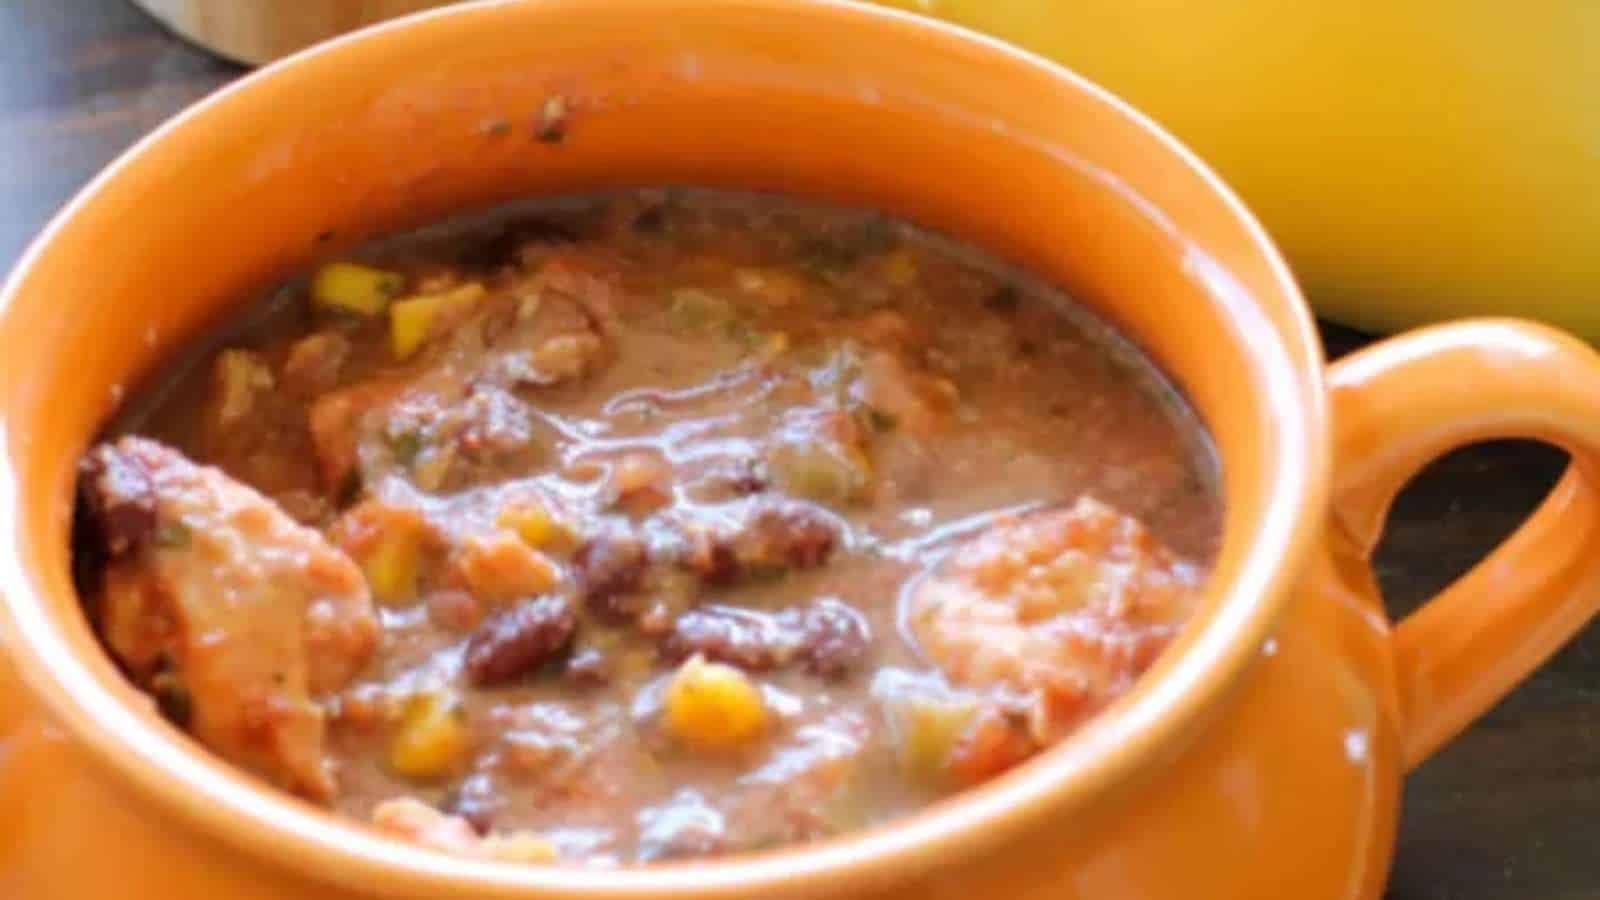 A bowl of chili with beans and corn on a table.